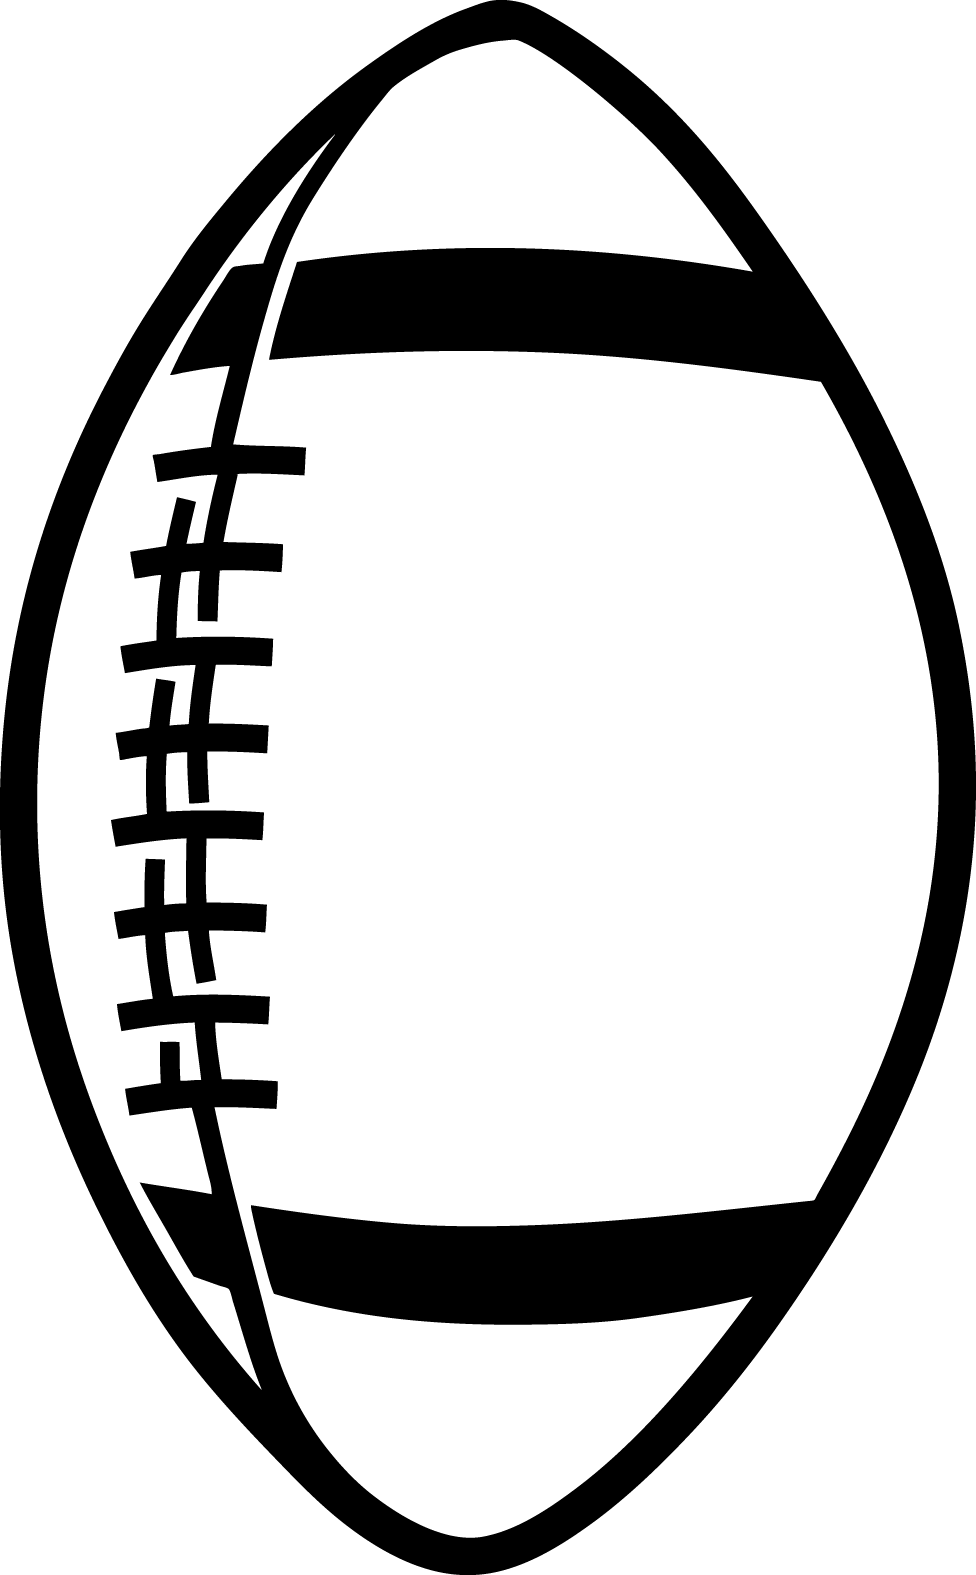 Football Field Black And White Clipart Panda Free Clipart Images